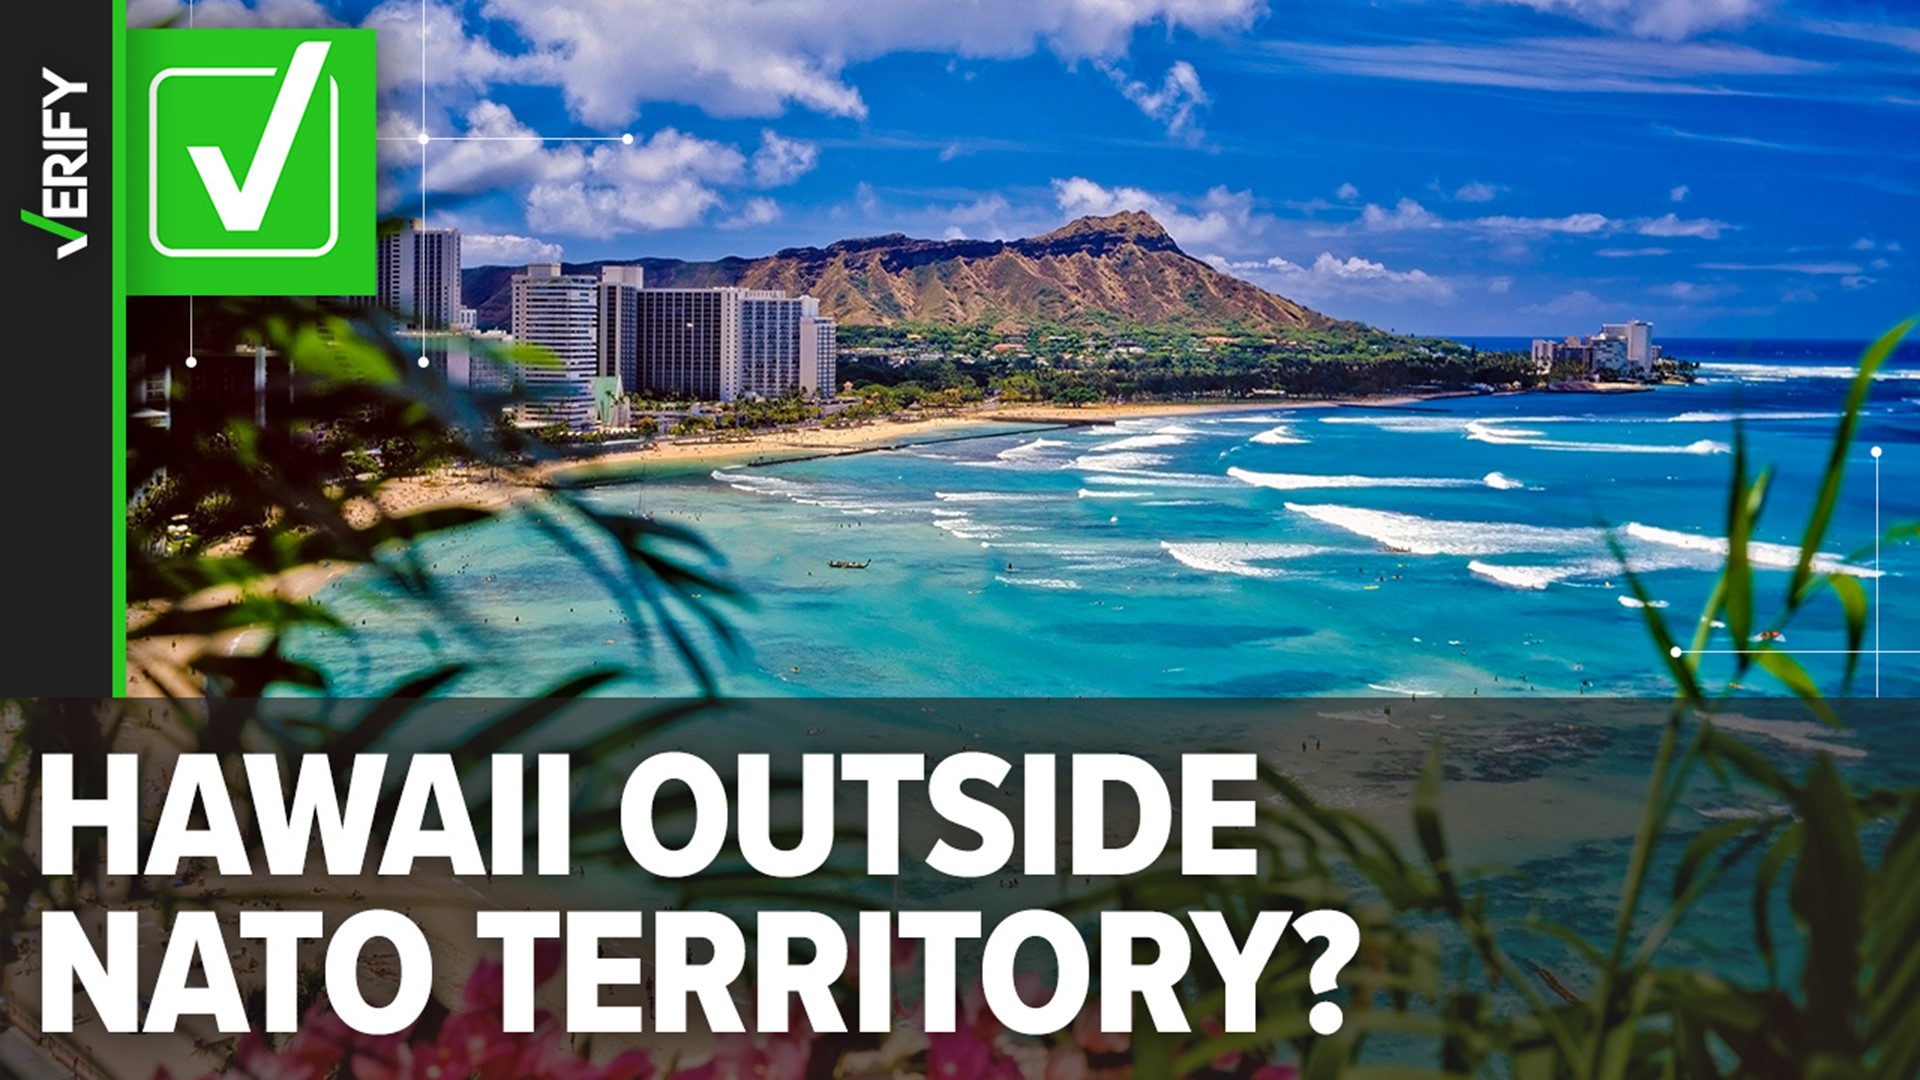 Hawaii is technically outside of the geographical boundaries set by NATO’s treaty. But that doesn’t mean other countries wouldn’t respond to an attack on the state.